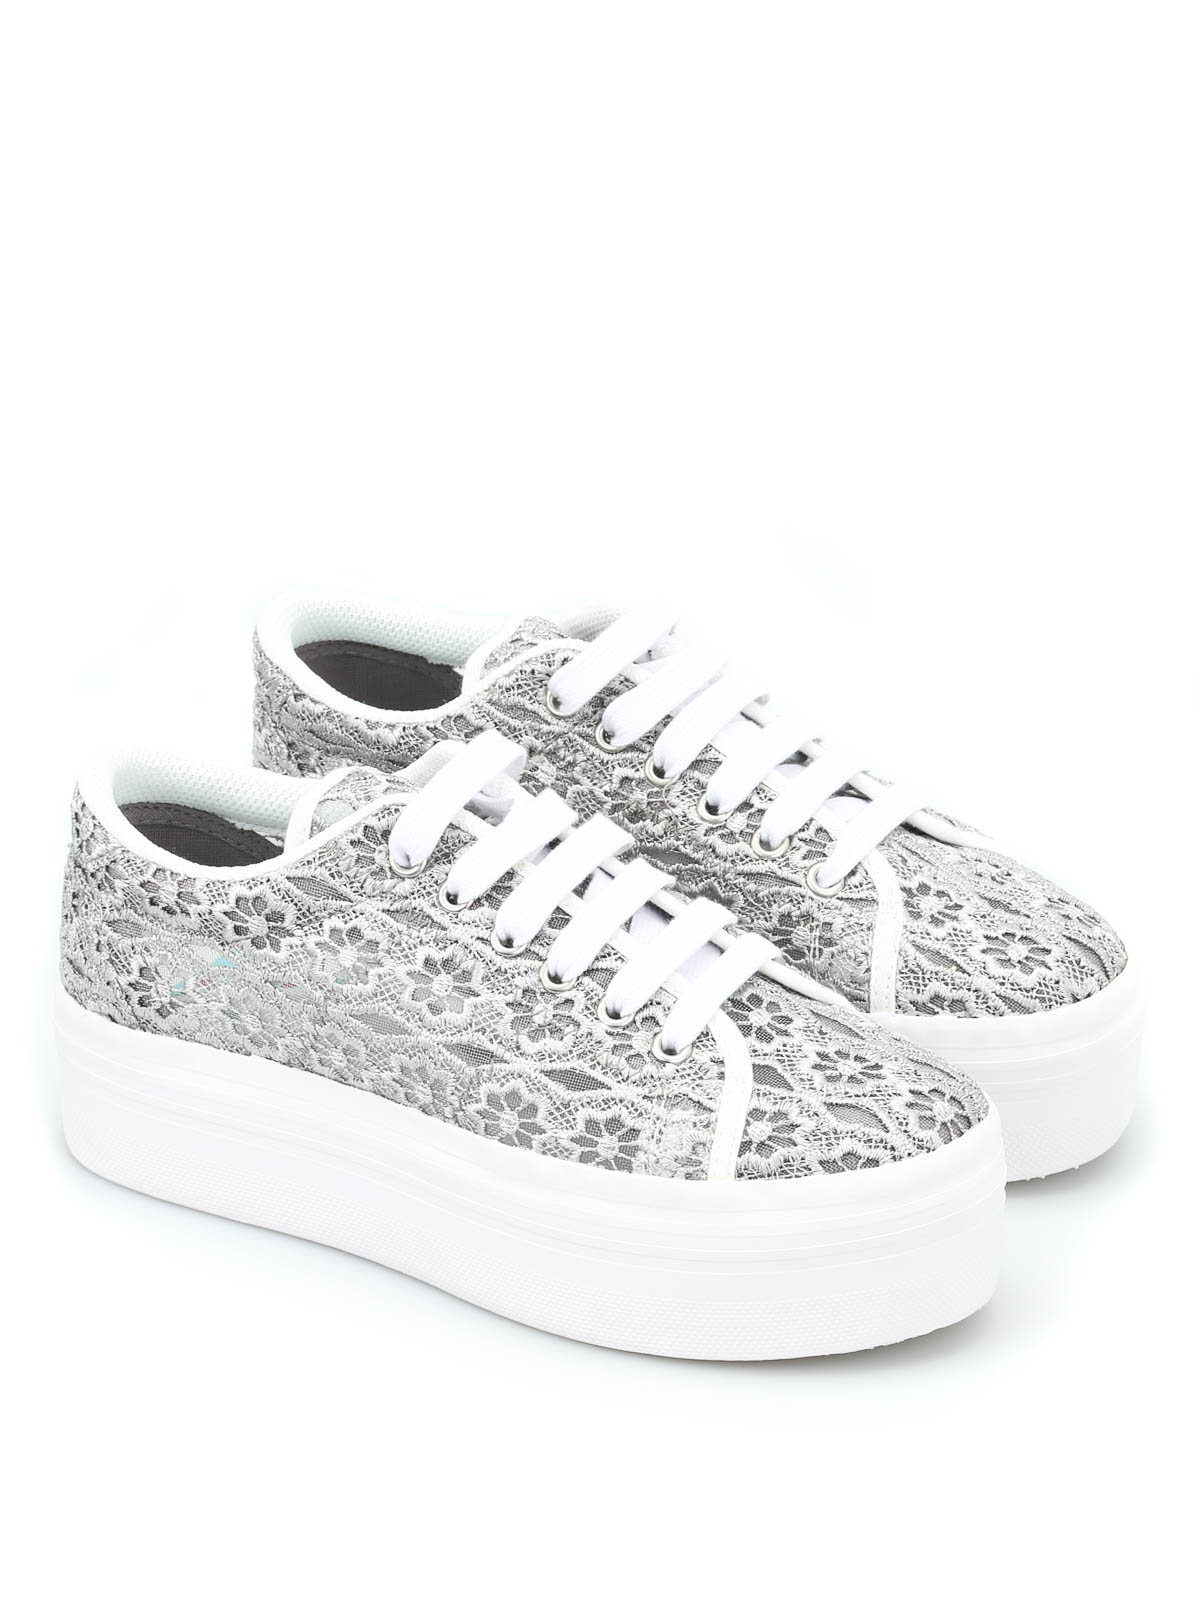 Seraph Høflig stå Trainers Jeffrey Campbell - Zomg lace trainers - ZOMGLACE